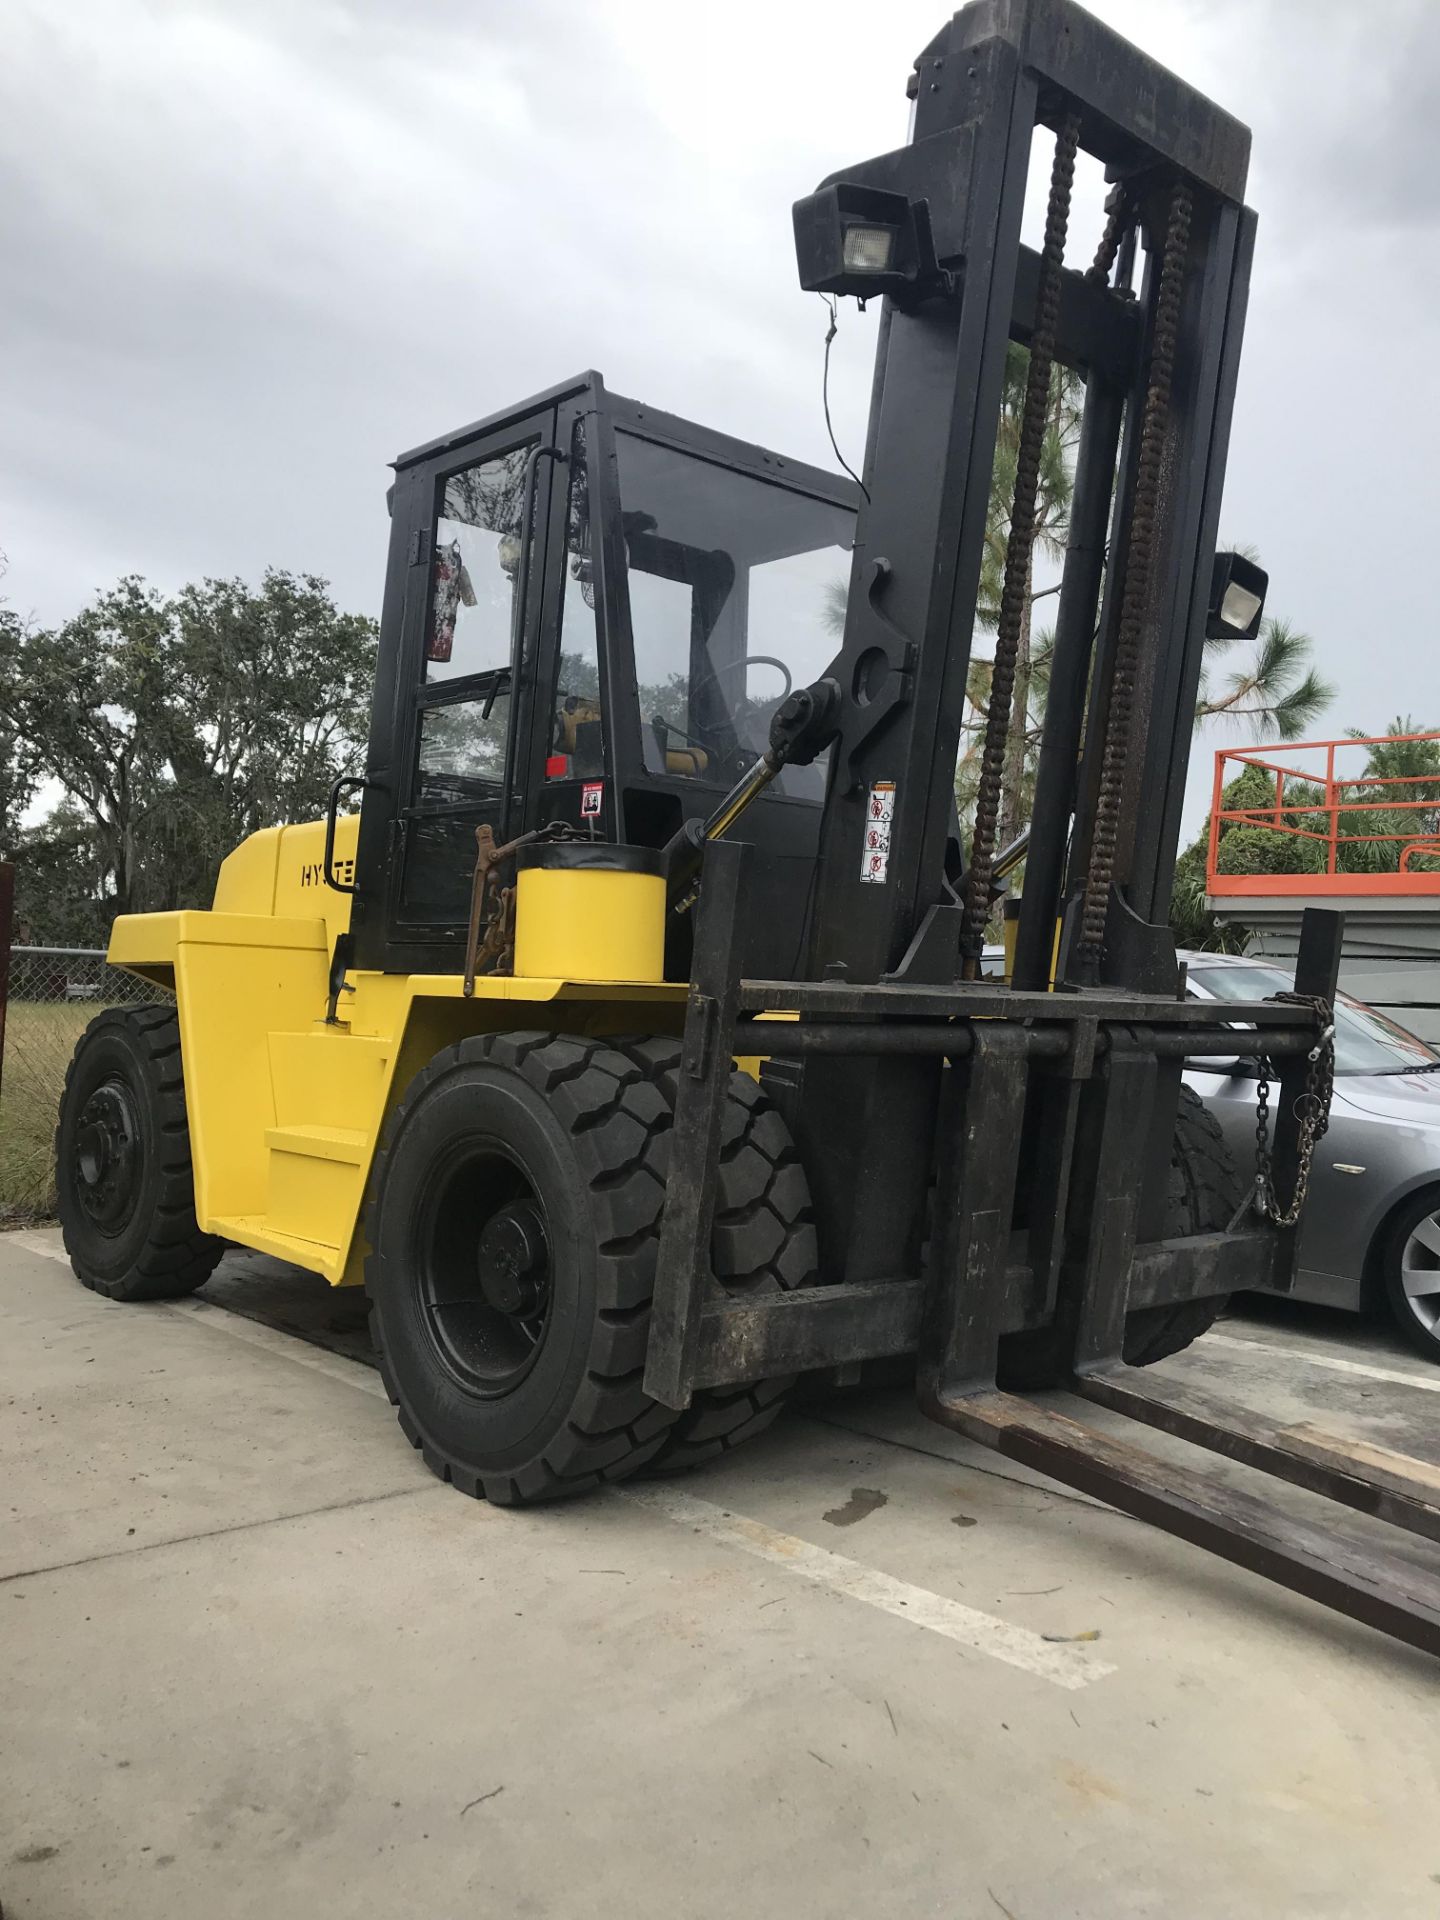 SEE VIDEO** HYSTER 20,000 LB LIFT